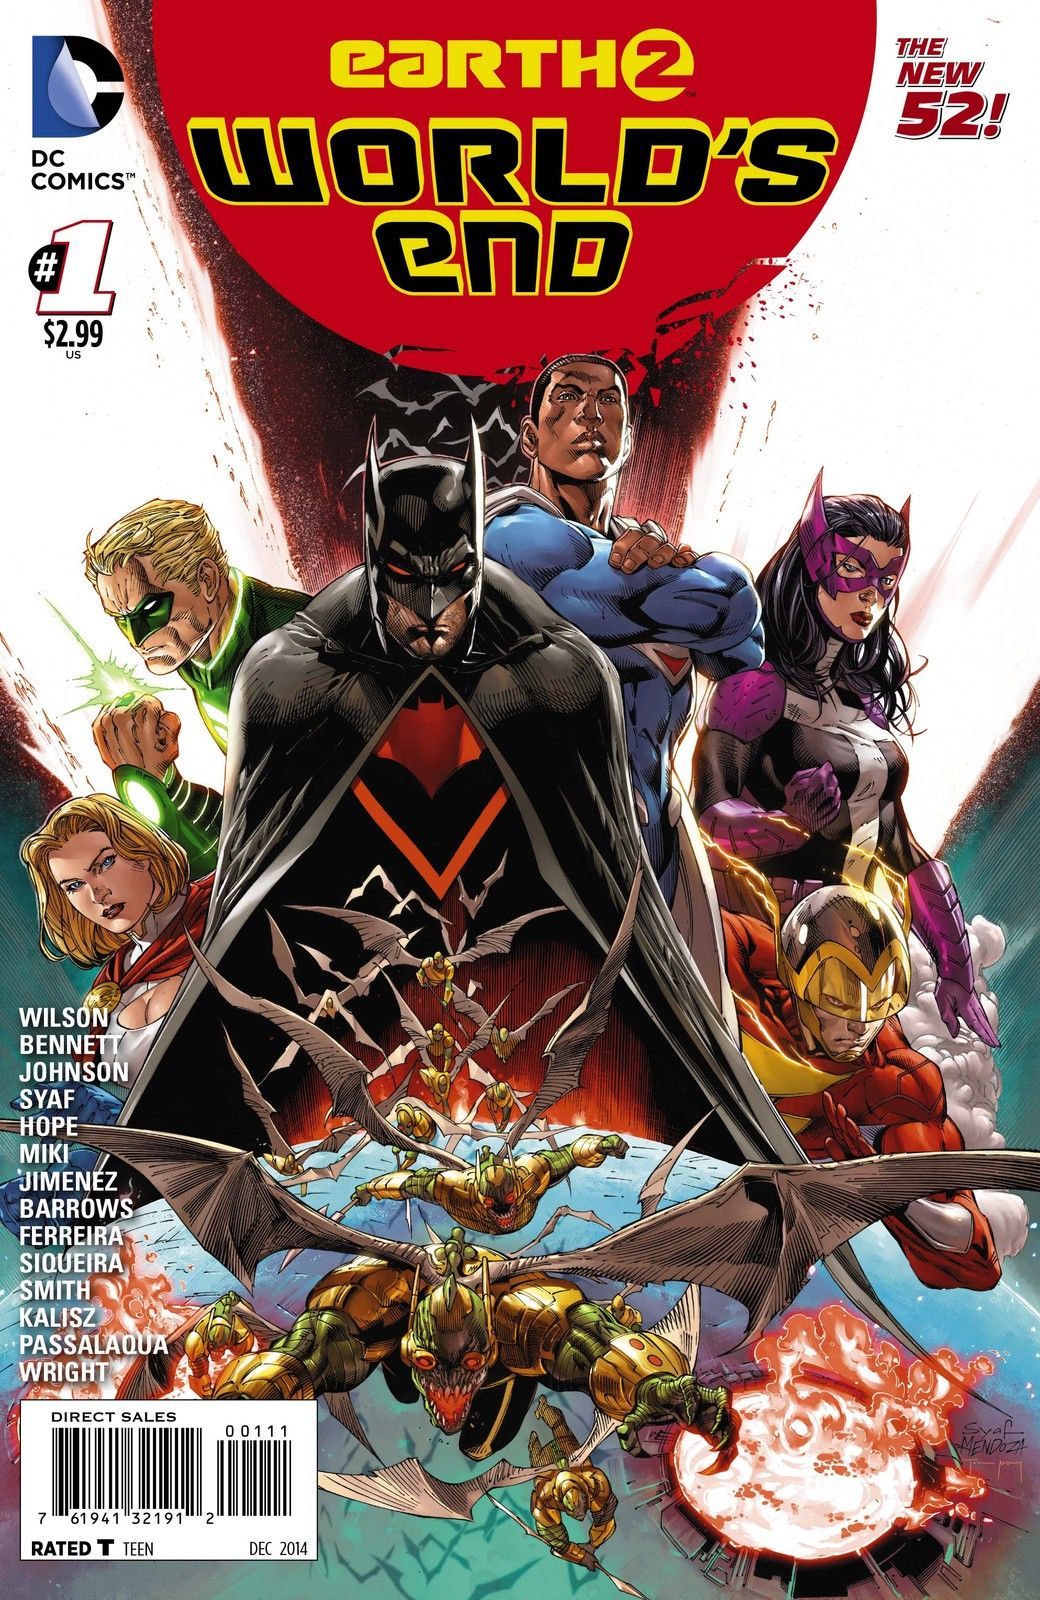 Earth 2 Worlds End #1 Comic